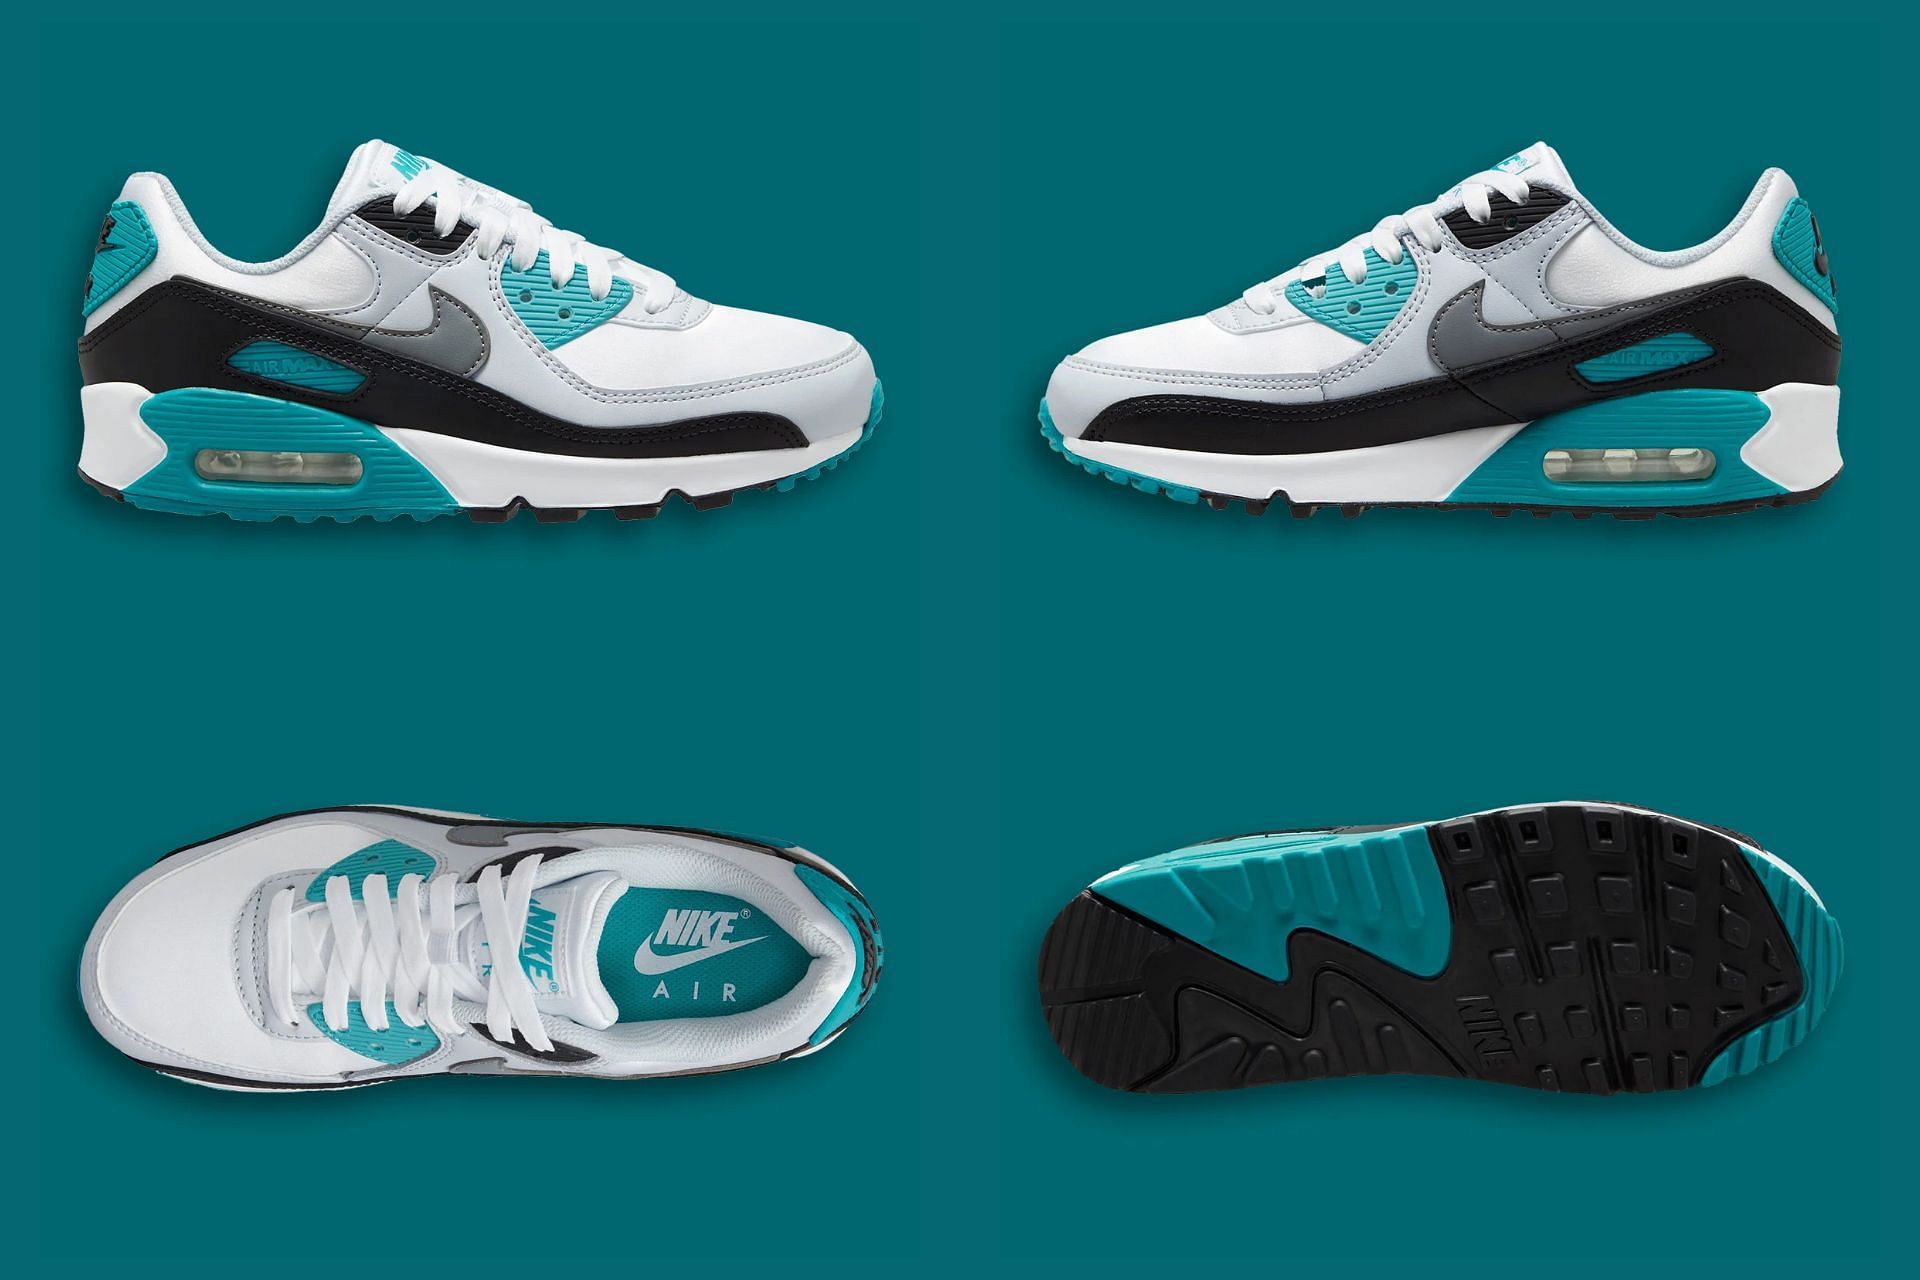 The upcoming Nike Air Max 90 &quot;Freshwater&quot; sneakers from every angle (Image via Sportskeeda)